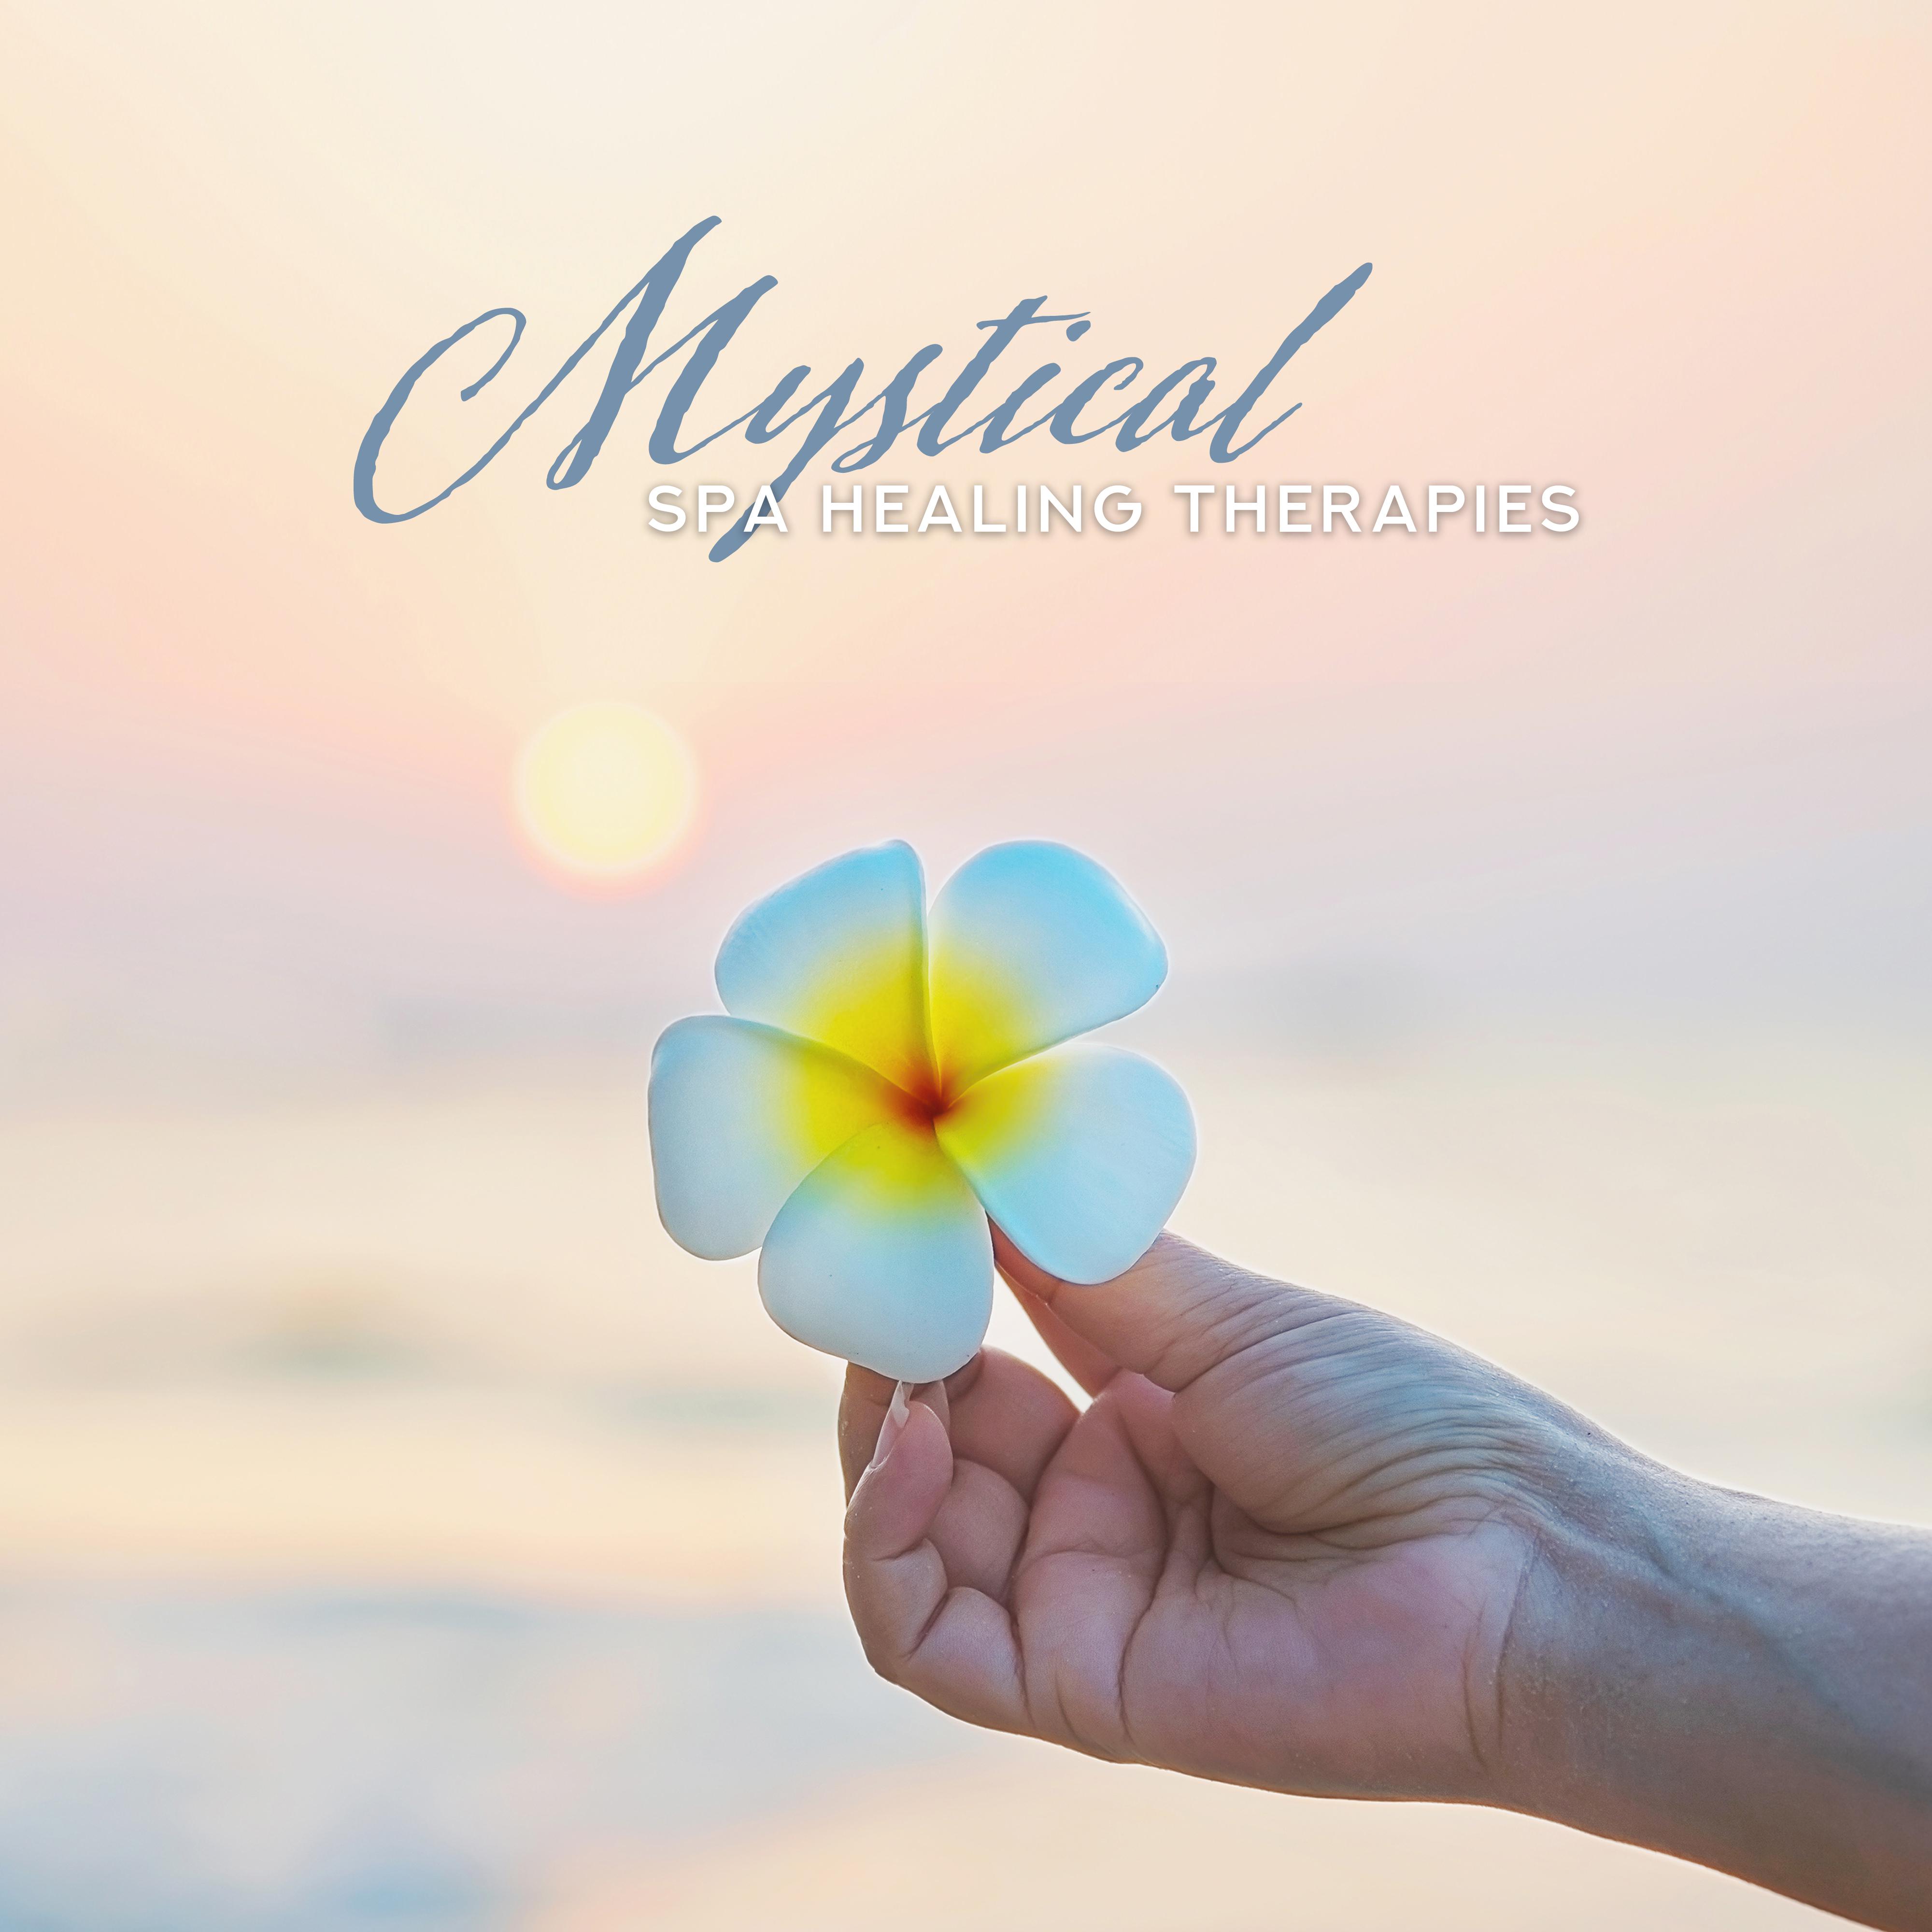 Mystical Spa Healing Therapies: 2019 New Age Music for Spa & Wellness Center, Healing & Relaxing Massage Therapy, Sauna, Bath